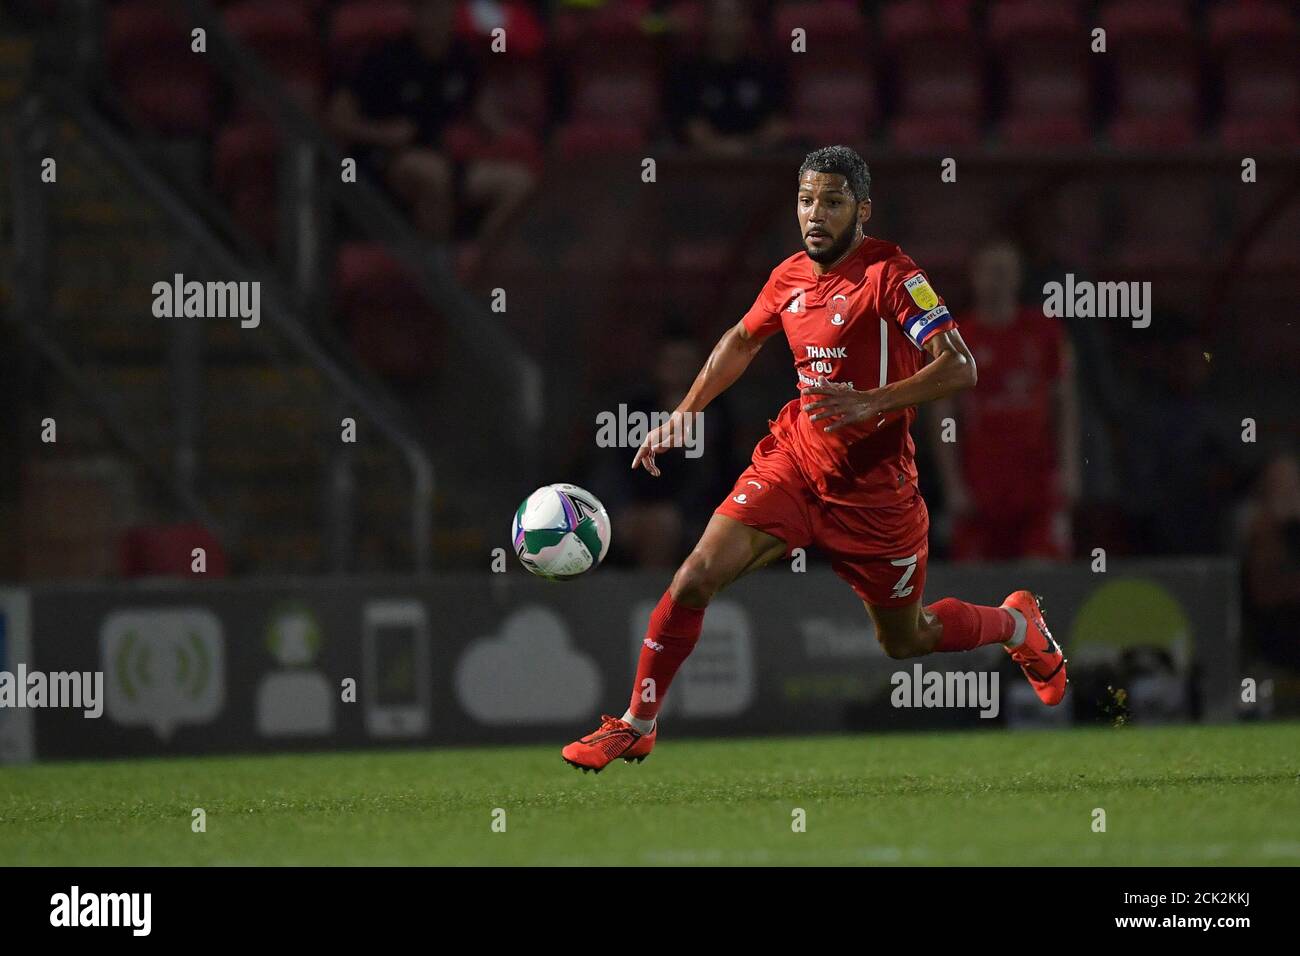 London, UK. 15th Sep, 2020. Jobi McAnuff of Leyton Orient during the Carabao Cup second round match between Leyton Orient and Plymouth Argyle at the Matchroom Stadium, London, England on 15 September 2020. Photo by Vince Mignott/PRiME Media Images. Credit: PRiME Media Images/Alamy Live News Stock Photo